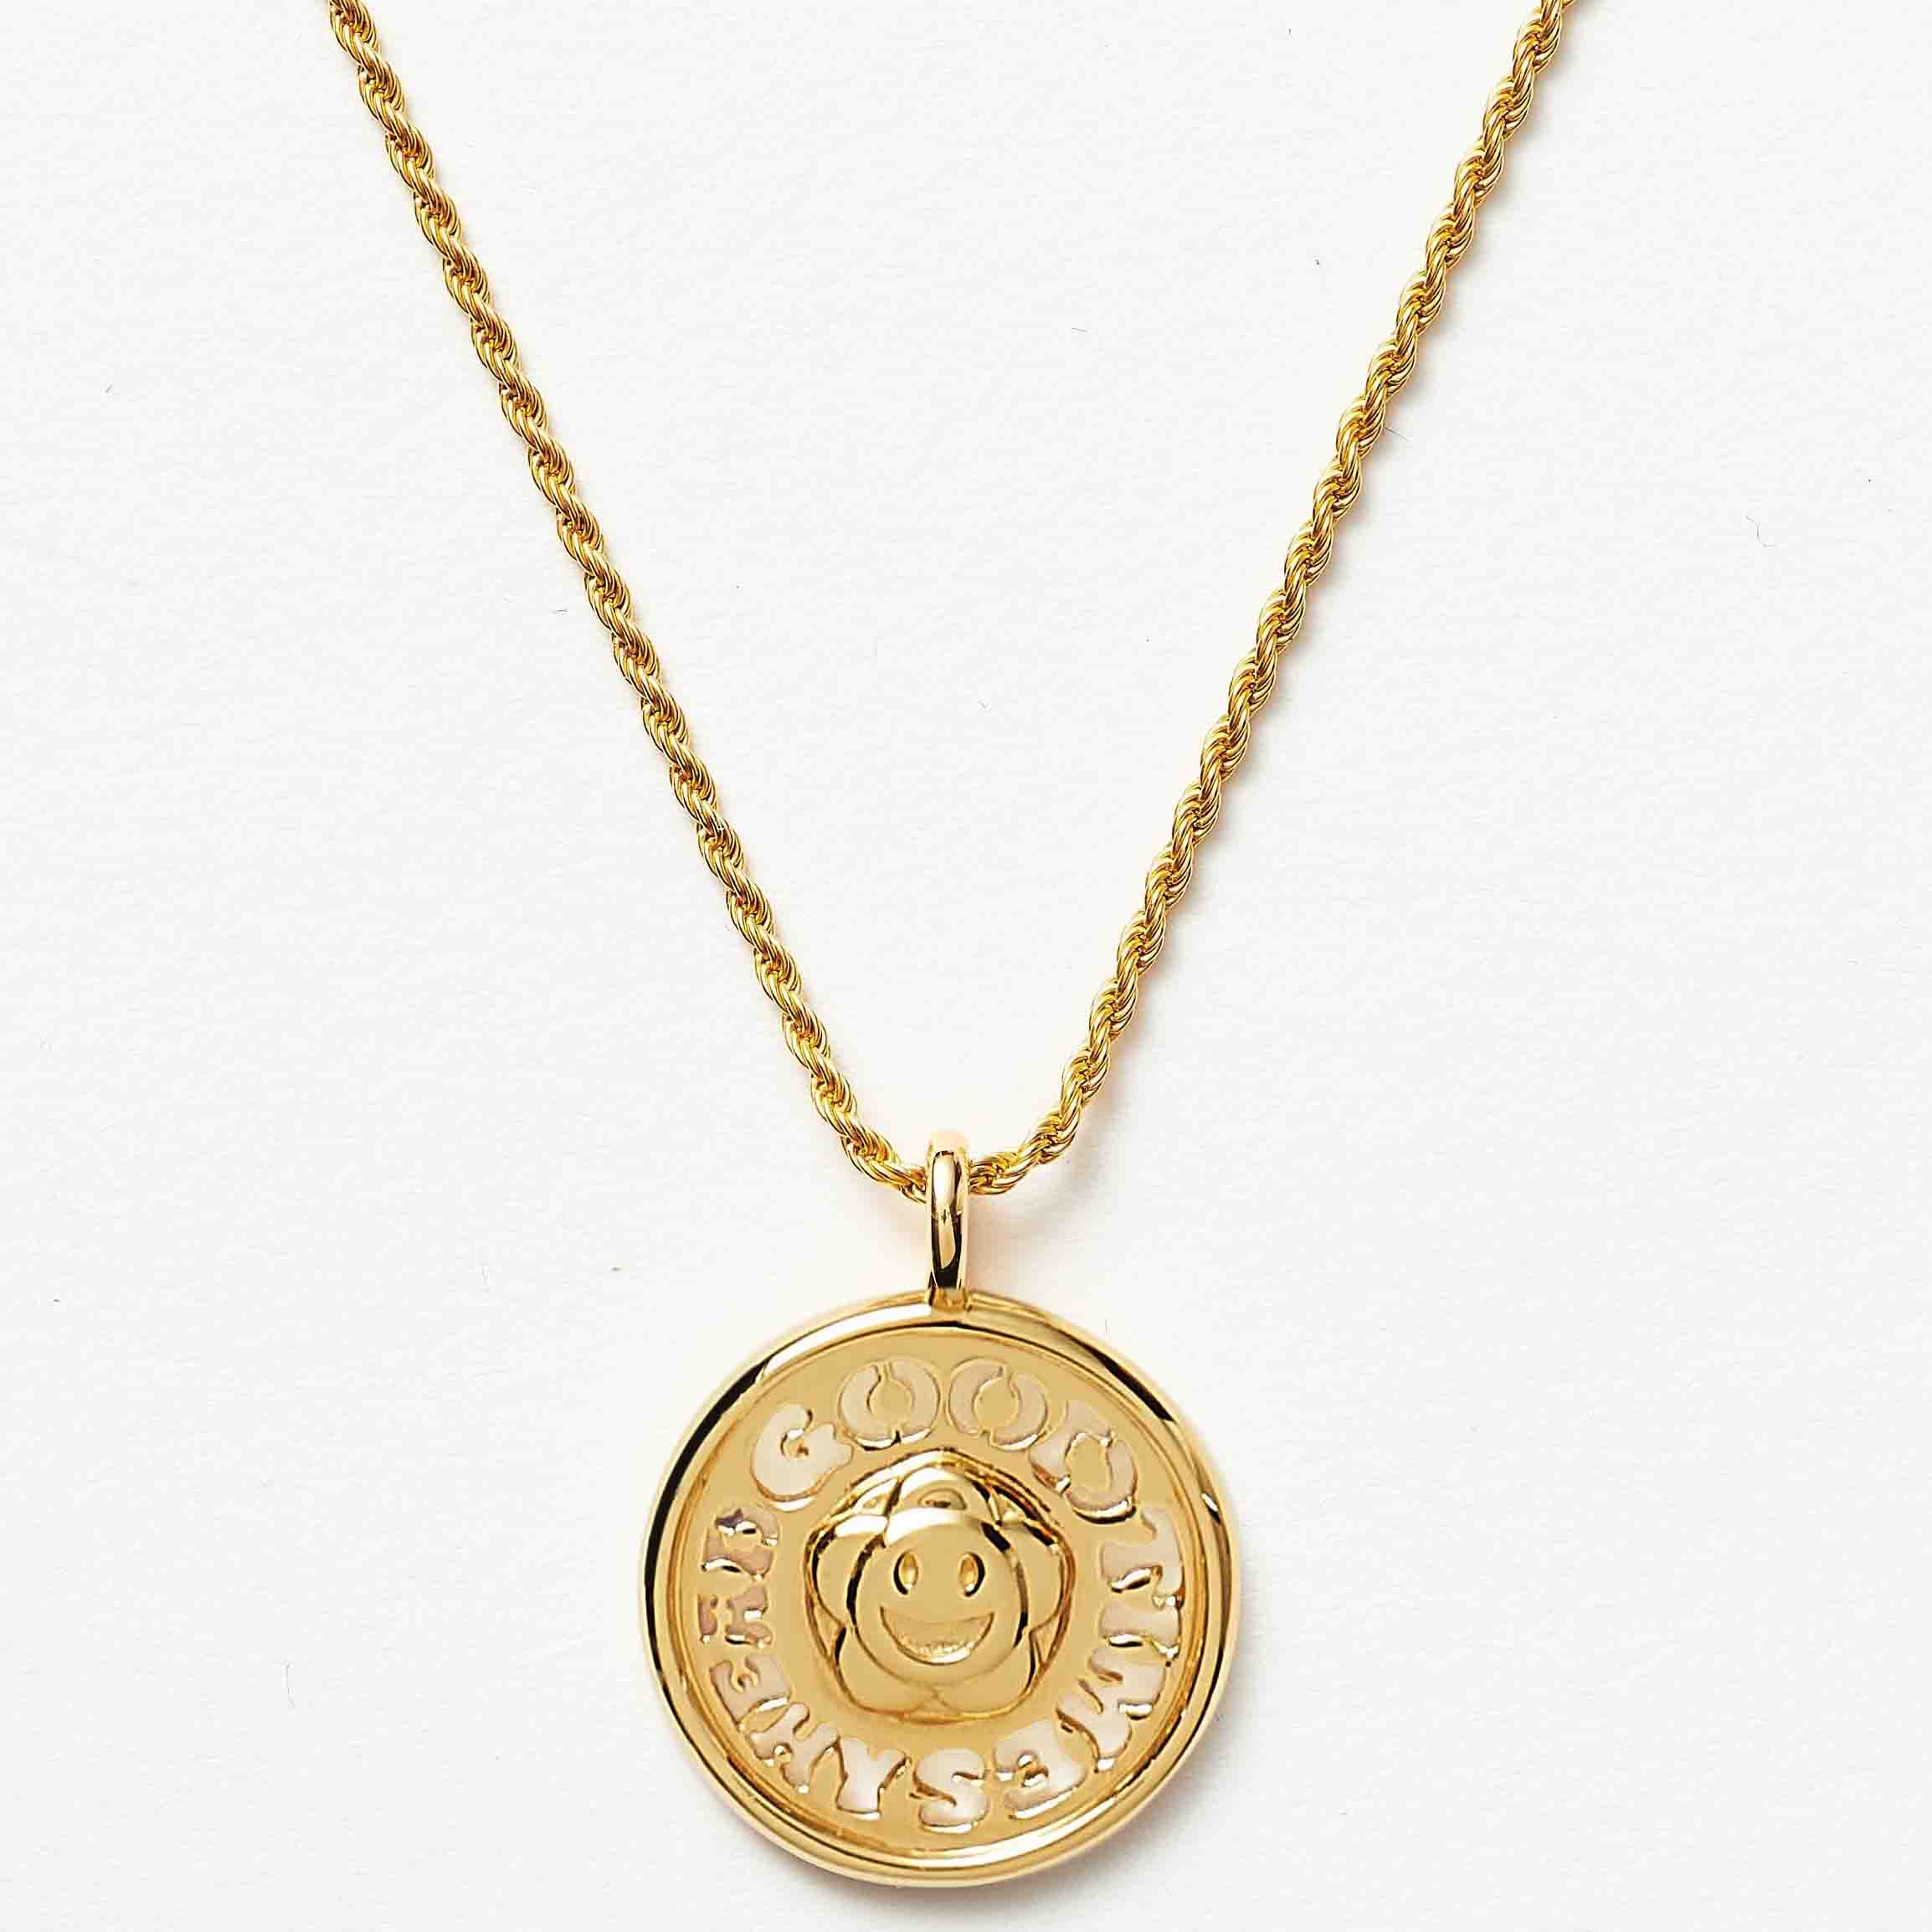 sunshine medallion pendant necklaces18ct gold plated on sterling silve or copper accroding your disgn